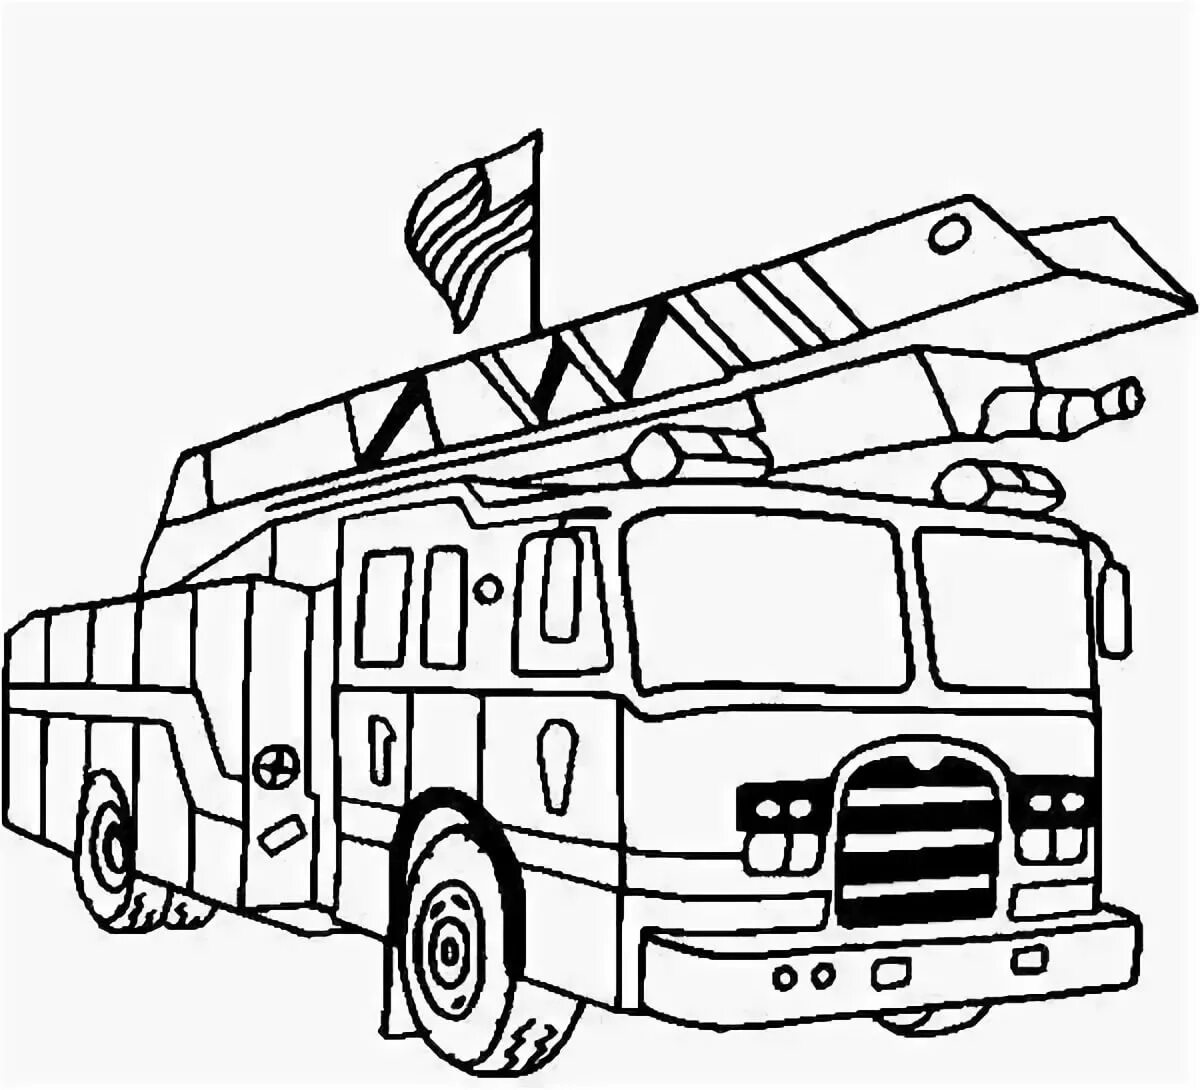 Intriguing firefighting equipment coloring page